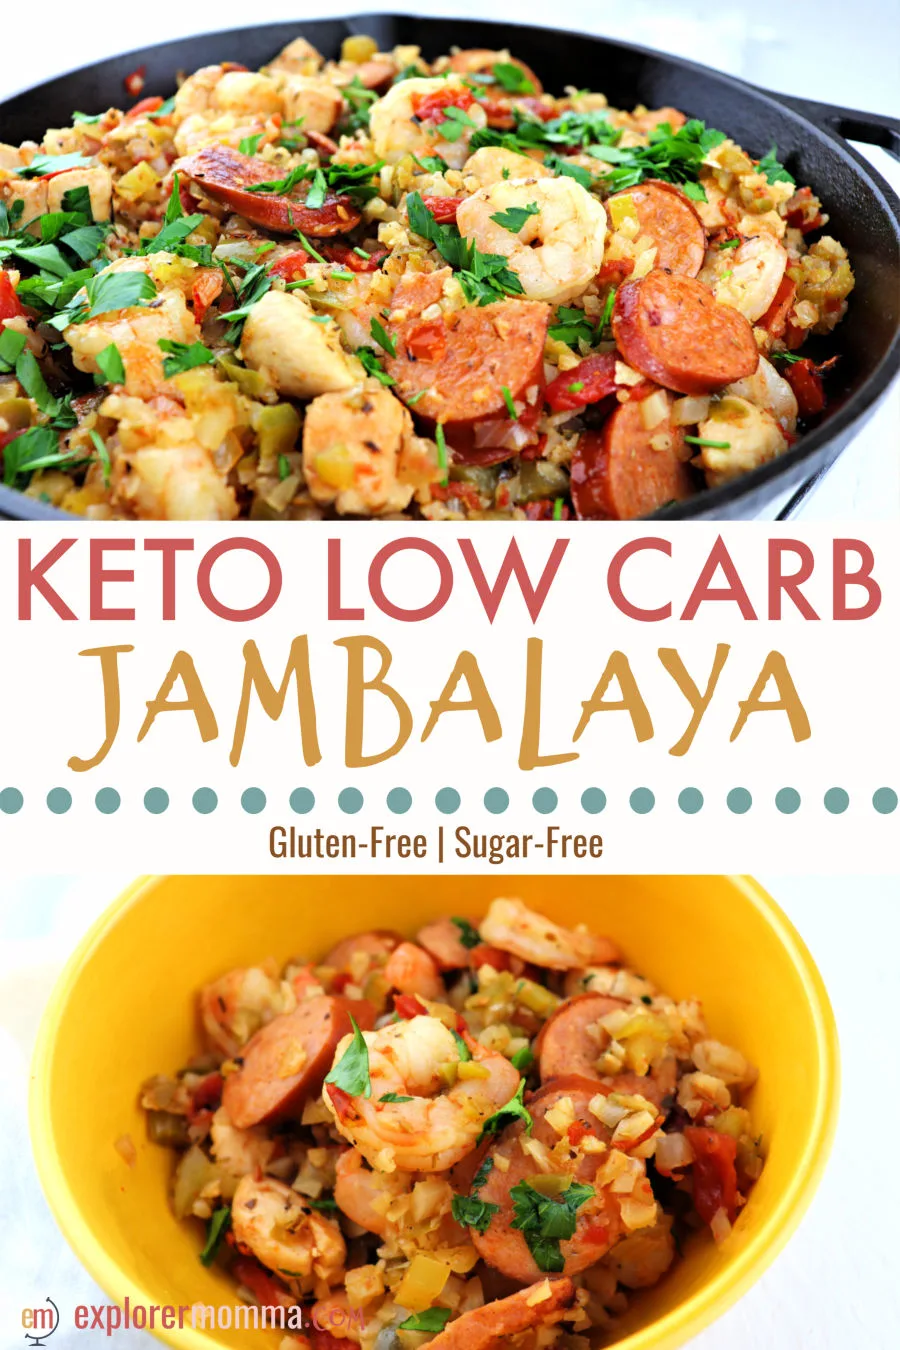 Keto jambalaya will add some spice to your low carb family dinner! Gluten-free with cauliflower rice, andouille sausage, shrimp, and chicken. The perfect one-pot meal. #ketodinners #ketorecipes